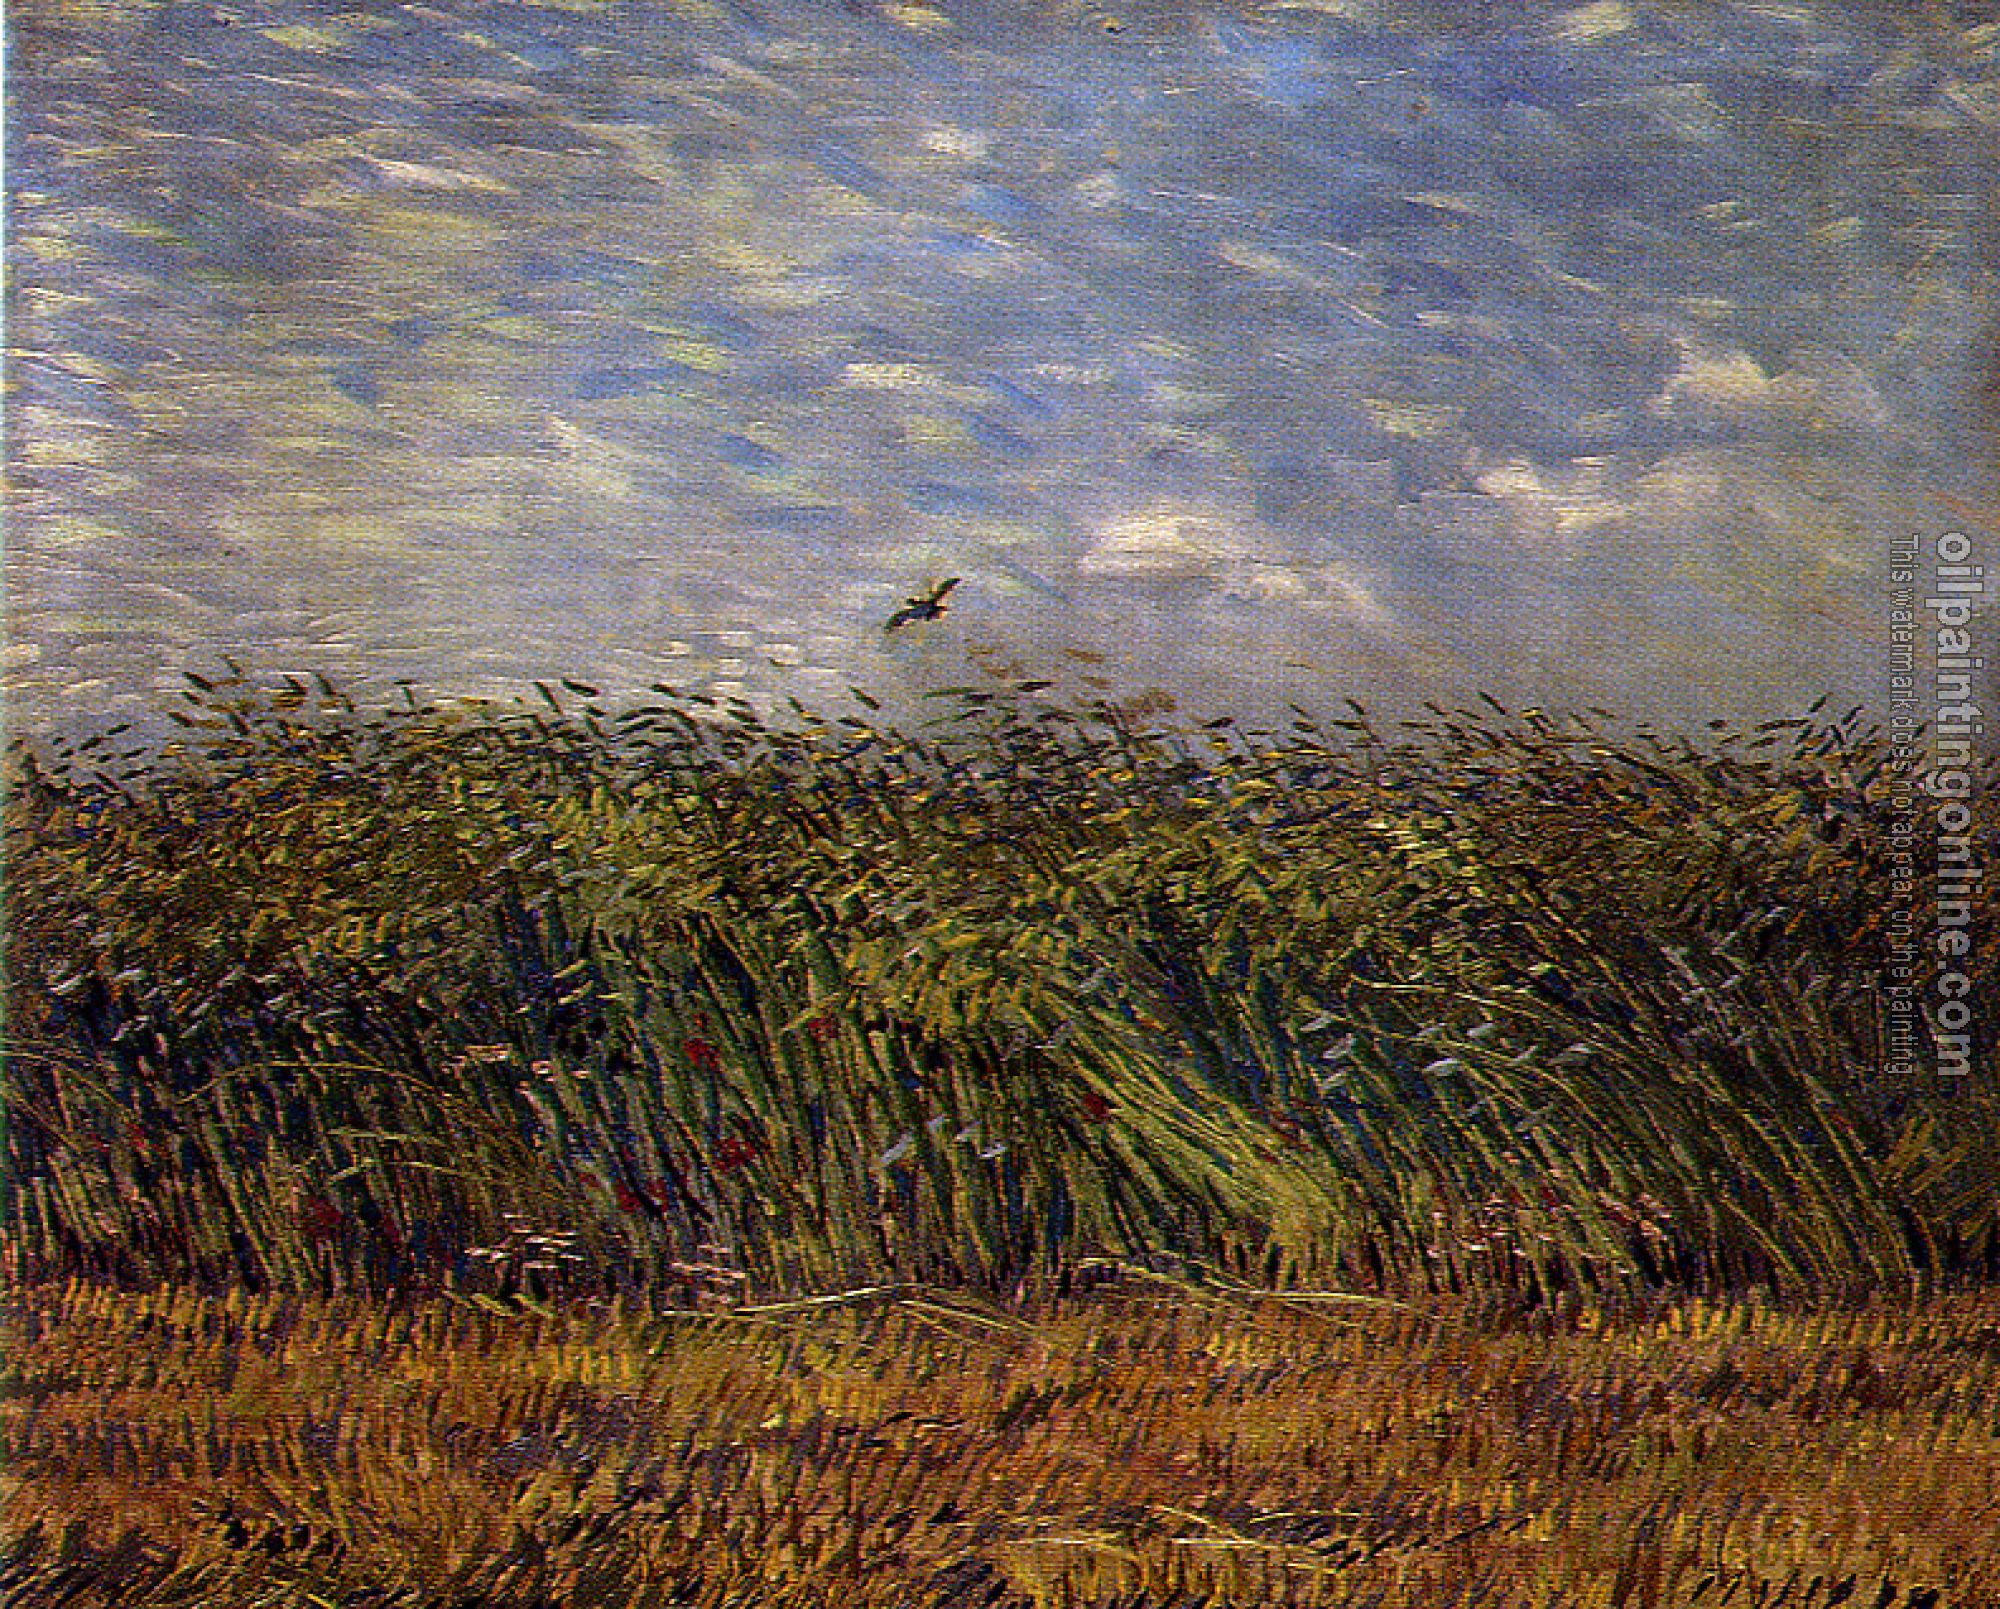 Gogh, Vincent van - Edge of a Wheat Field With Poppies and a Lark